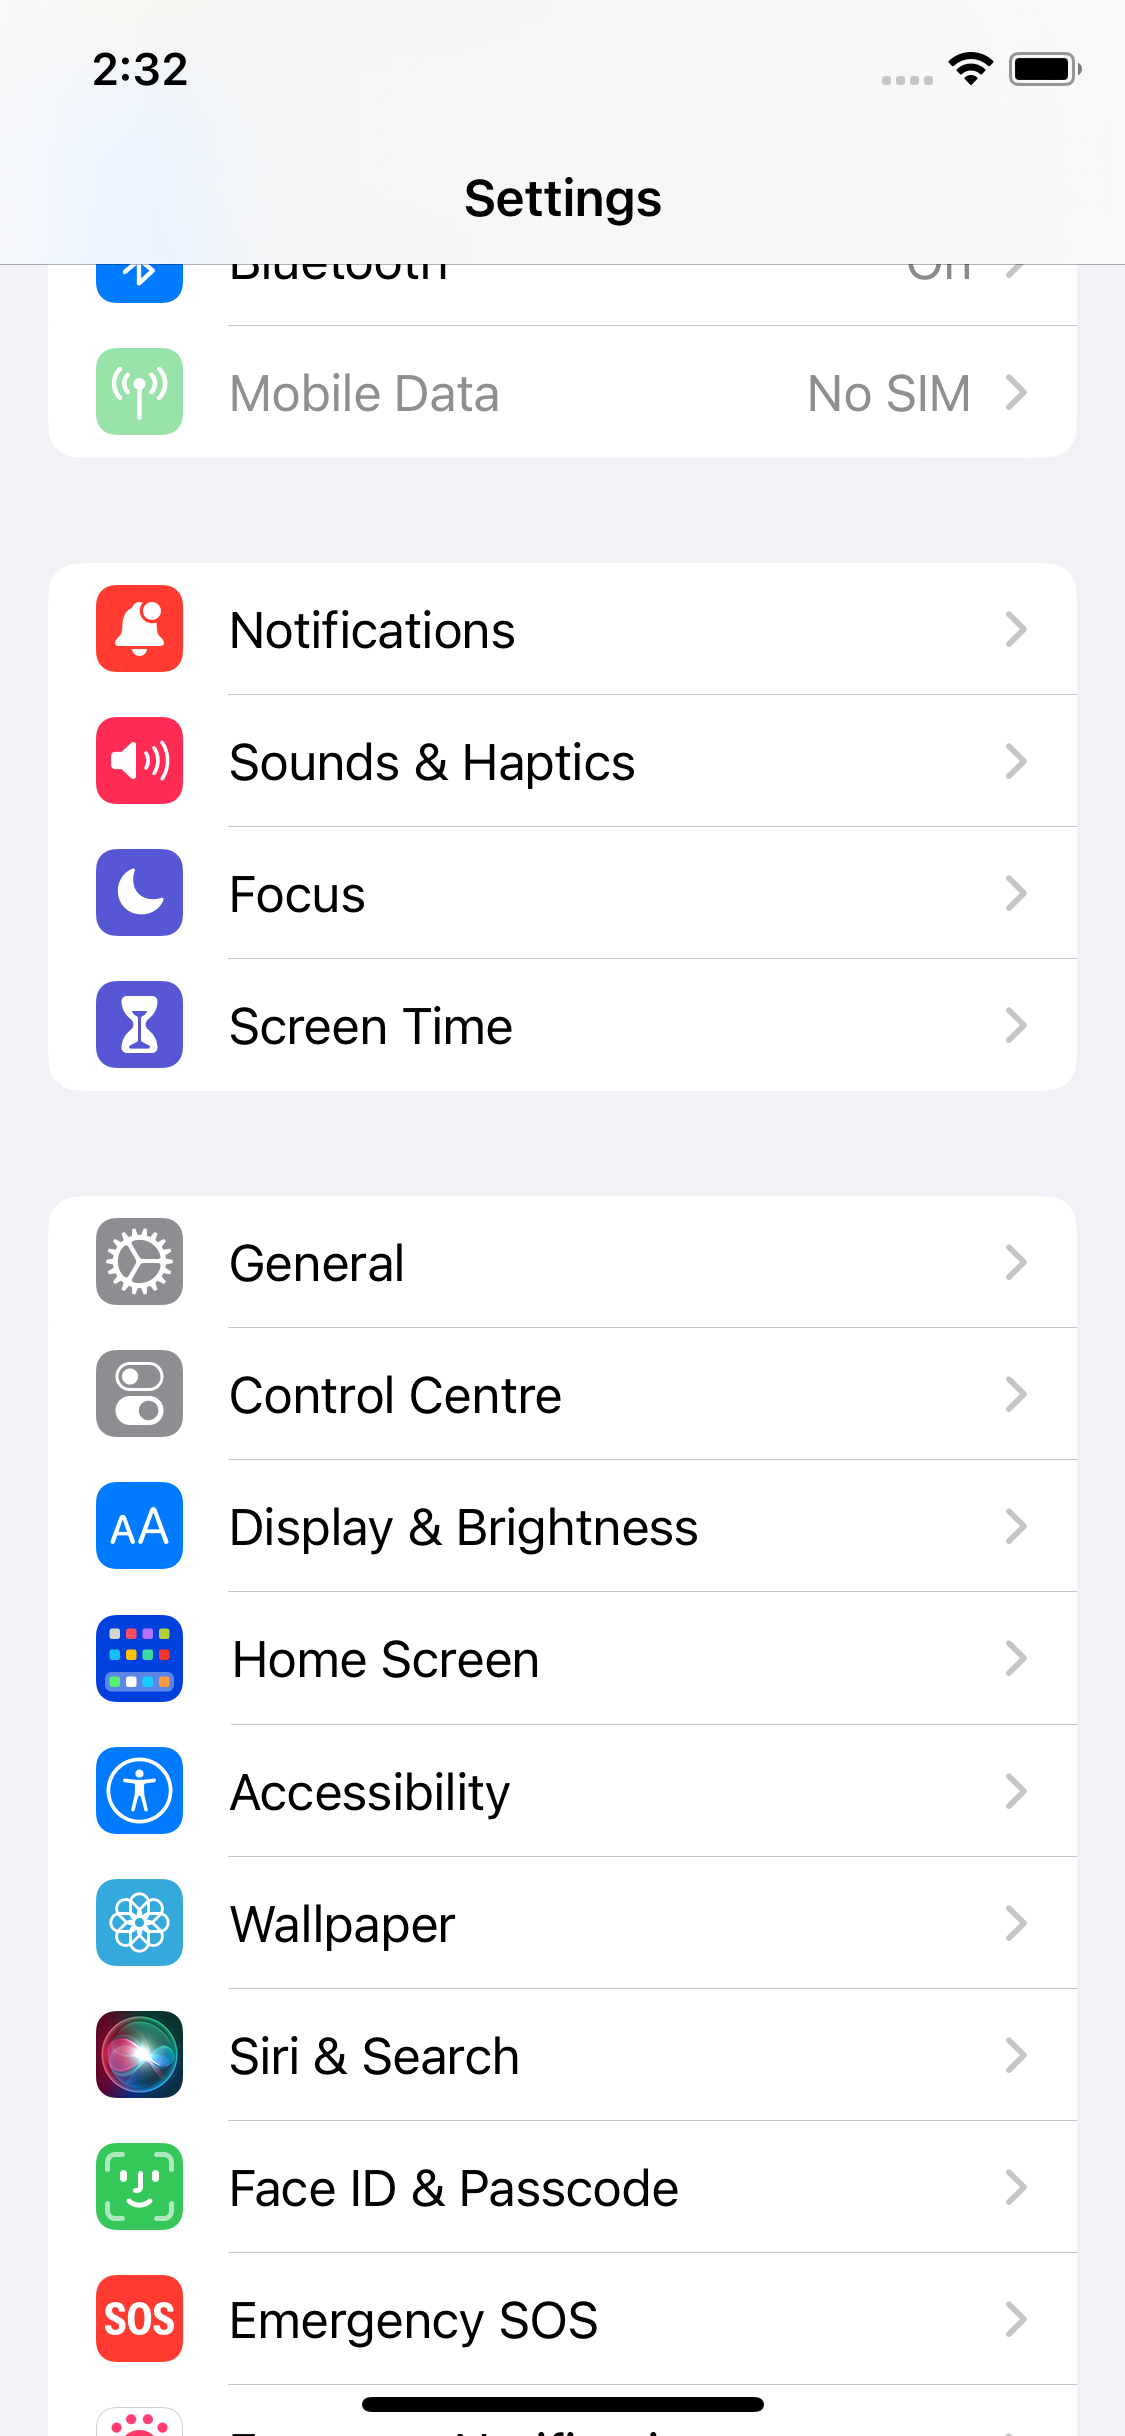 Navigate to the Settings app and select General